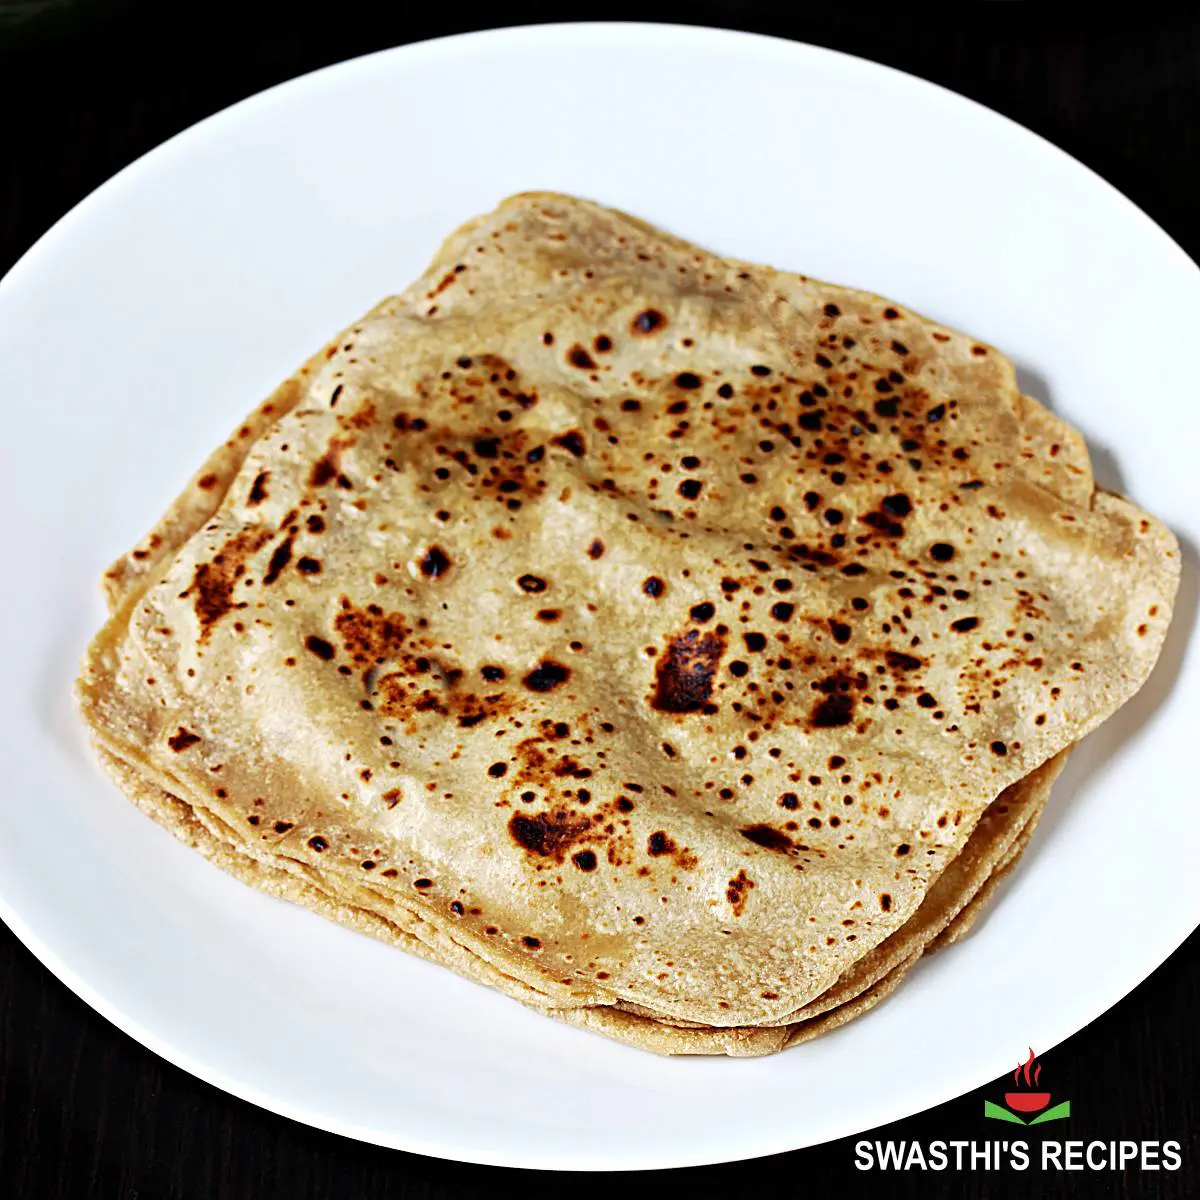 paratha recipe with whole wheat flour, salt and water